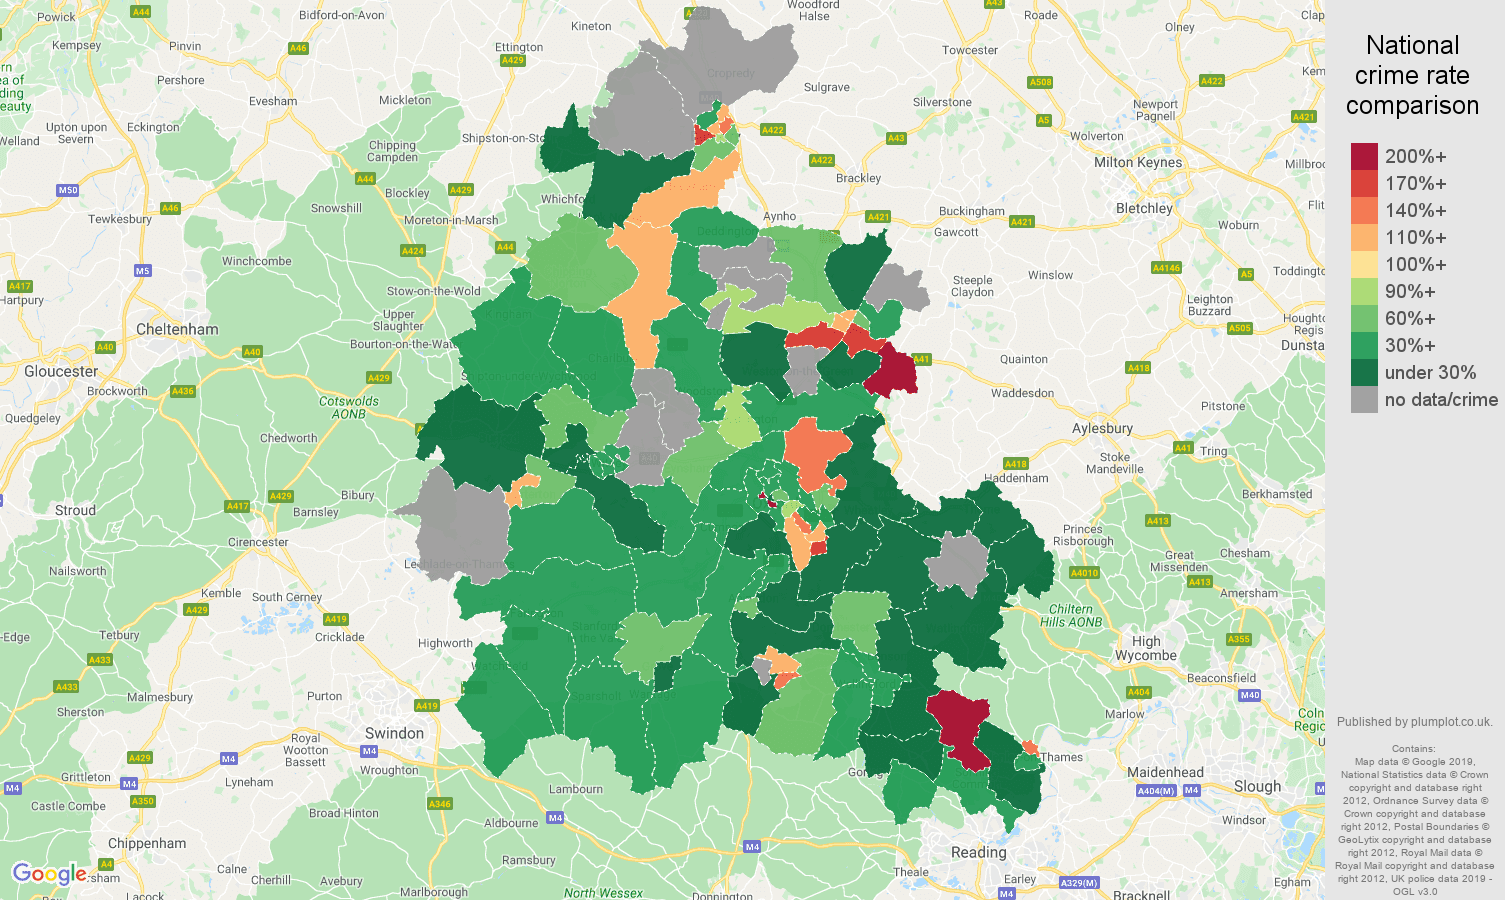 Oxfordshire other crime rate comparison map